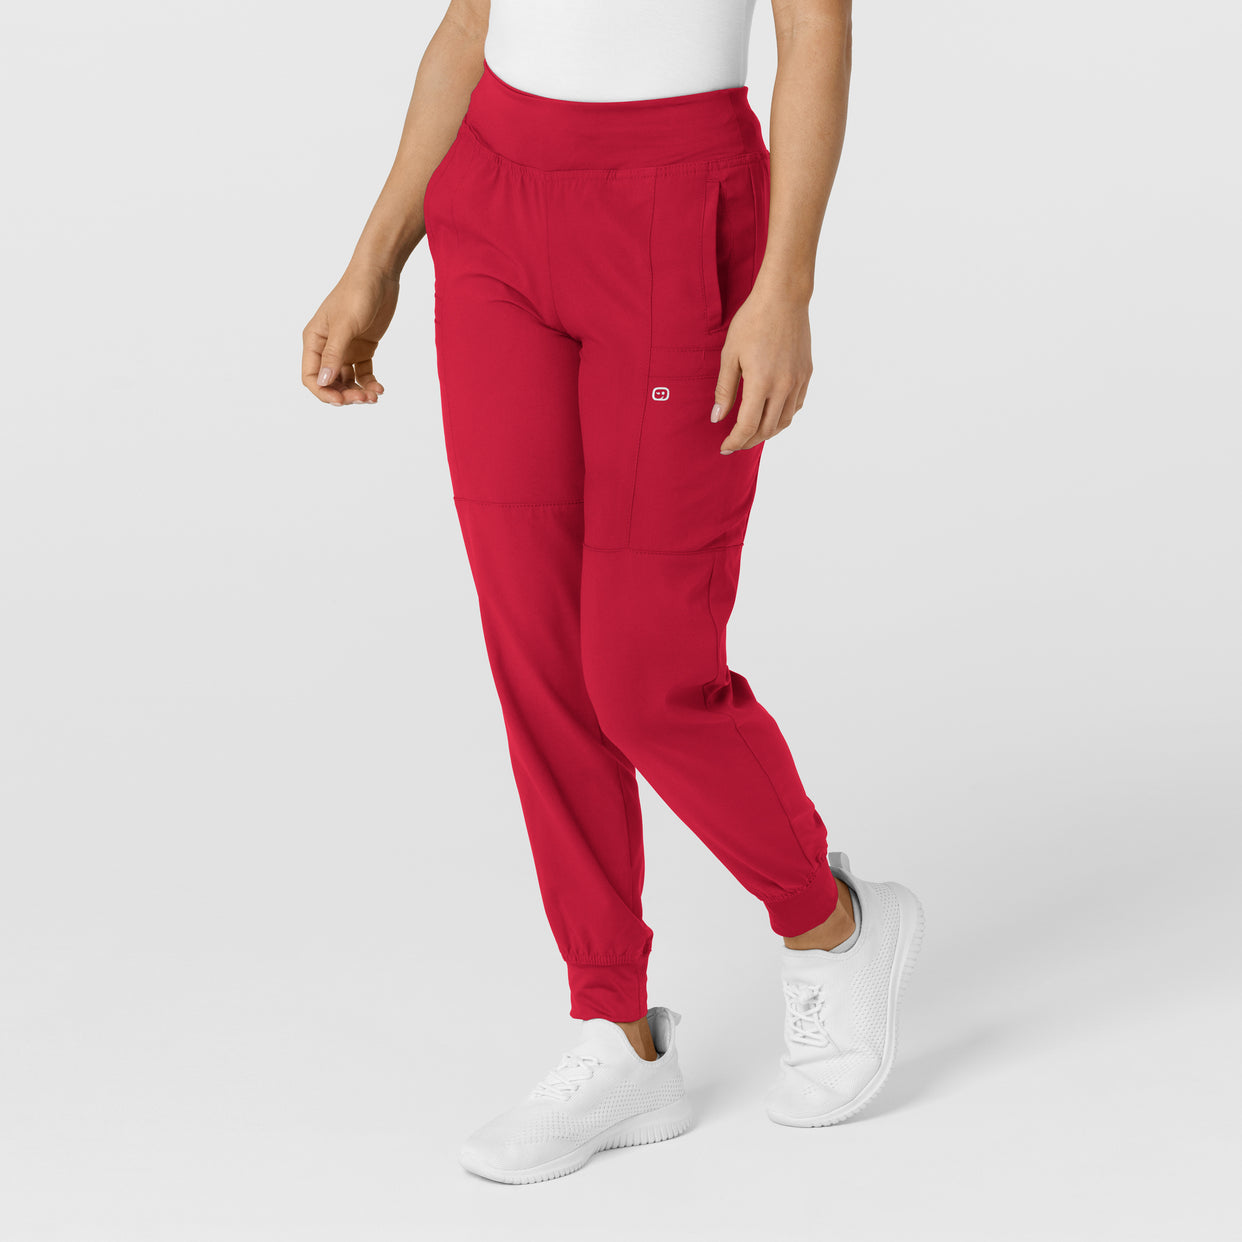 W123 Women's Comfort Waist Cargo Jogger Scrub Pant Red side view